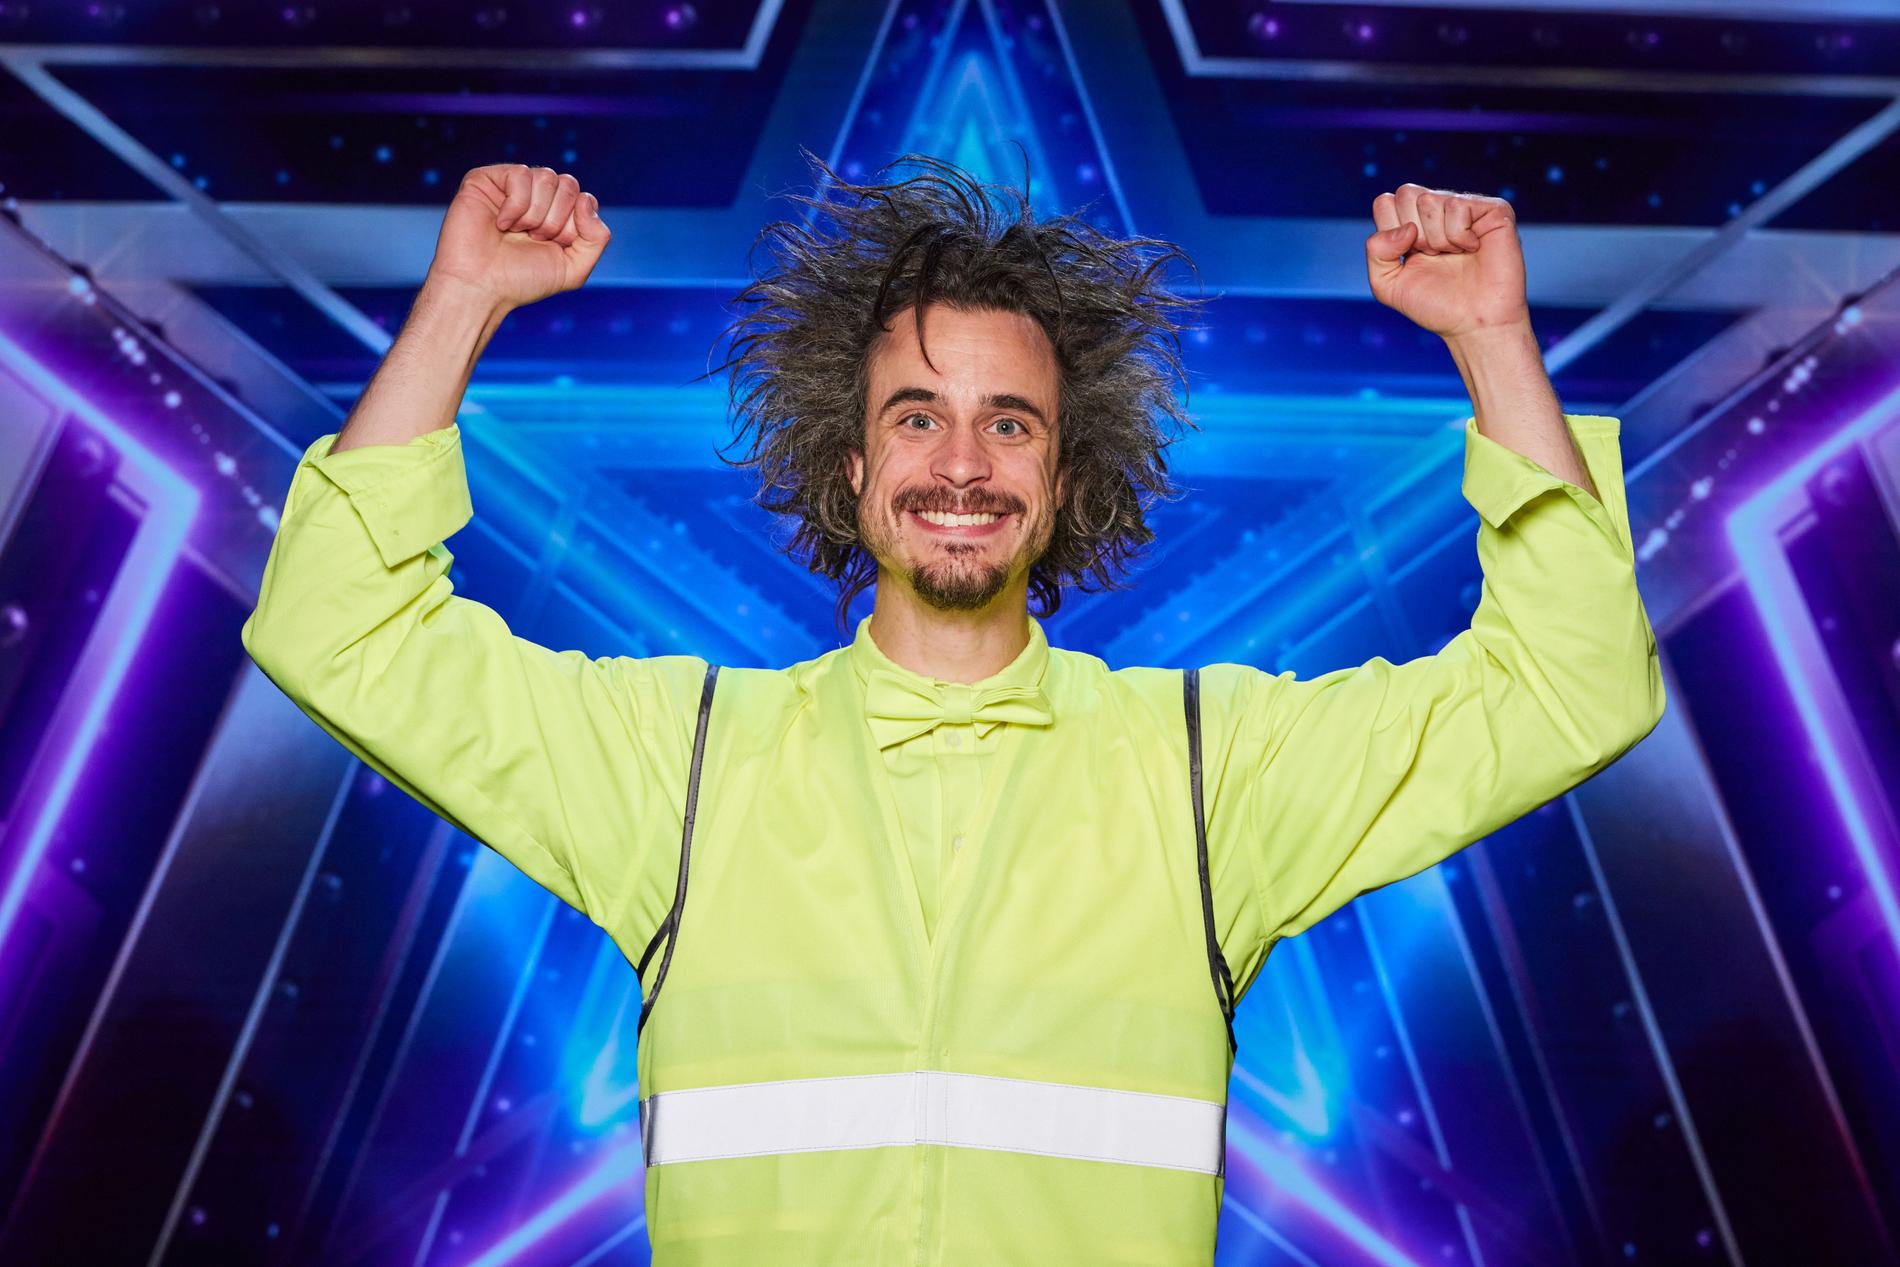 The second place in the betting is Viggo Finn, who reached the finals of the British “Got Talent” program